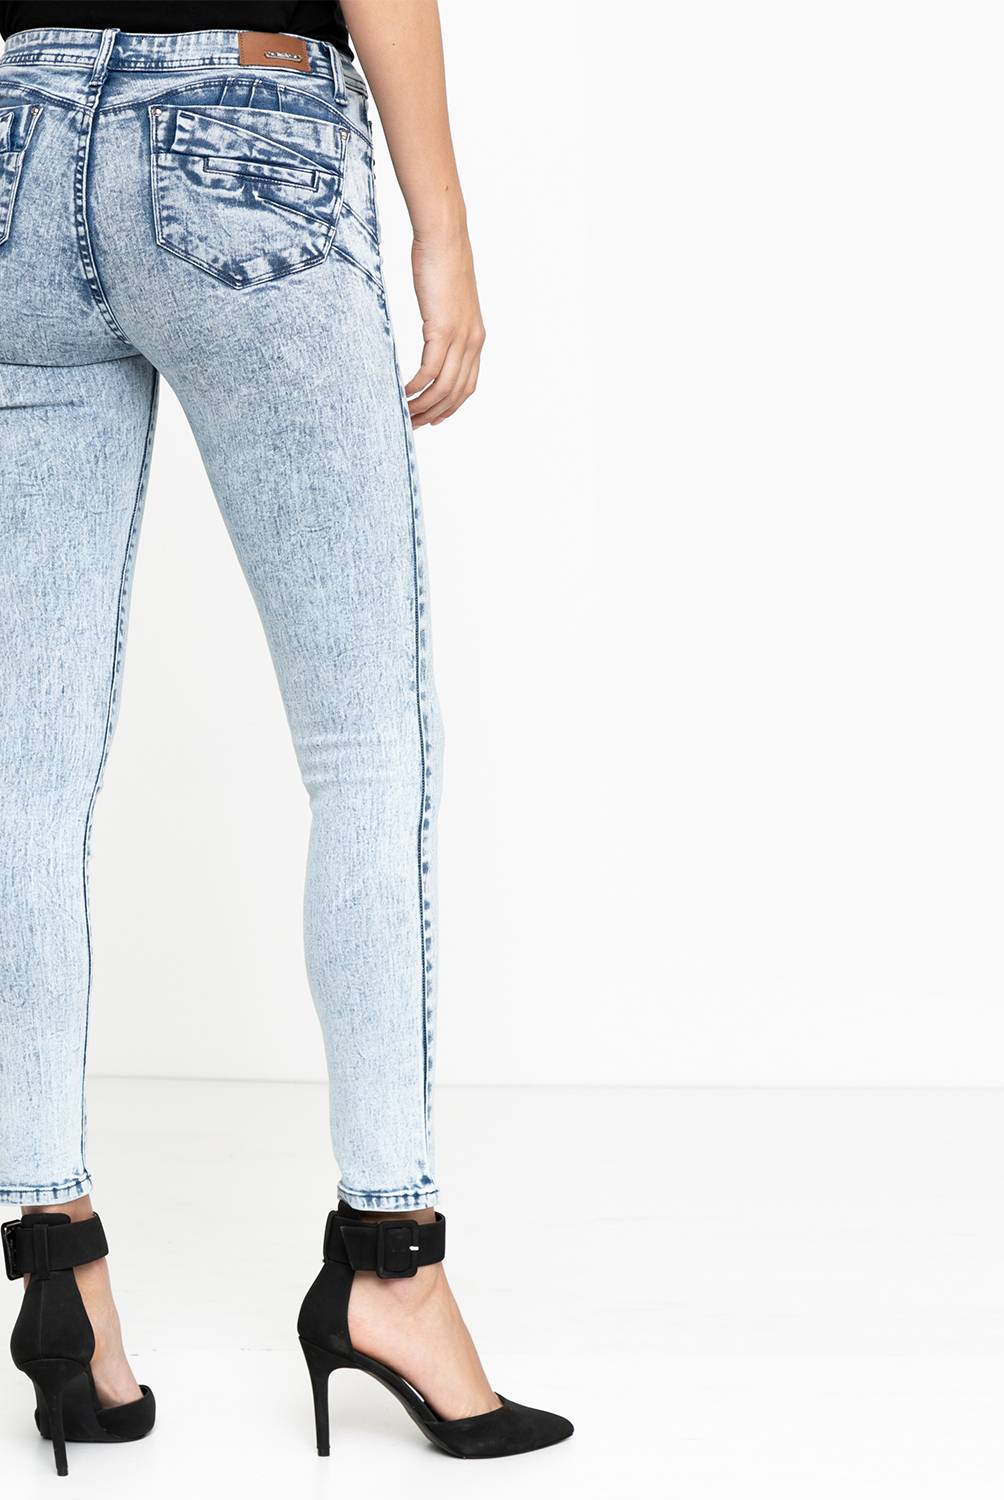 Mossimo - Jeans Skinny Fit Mujer